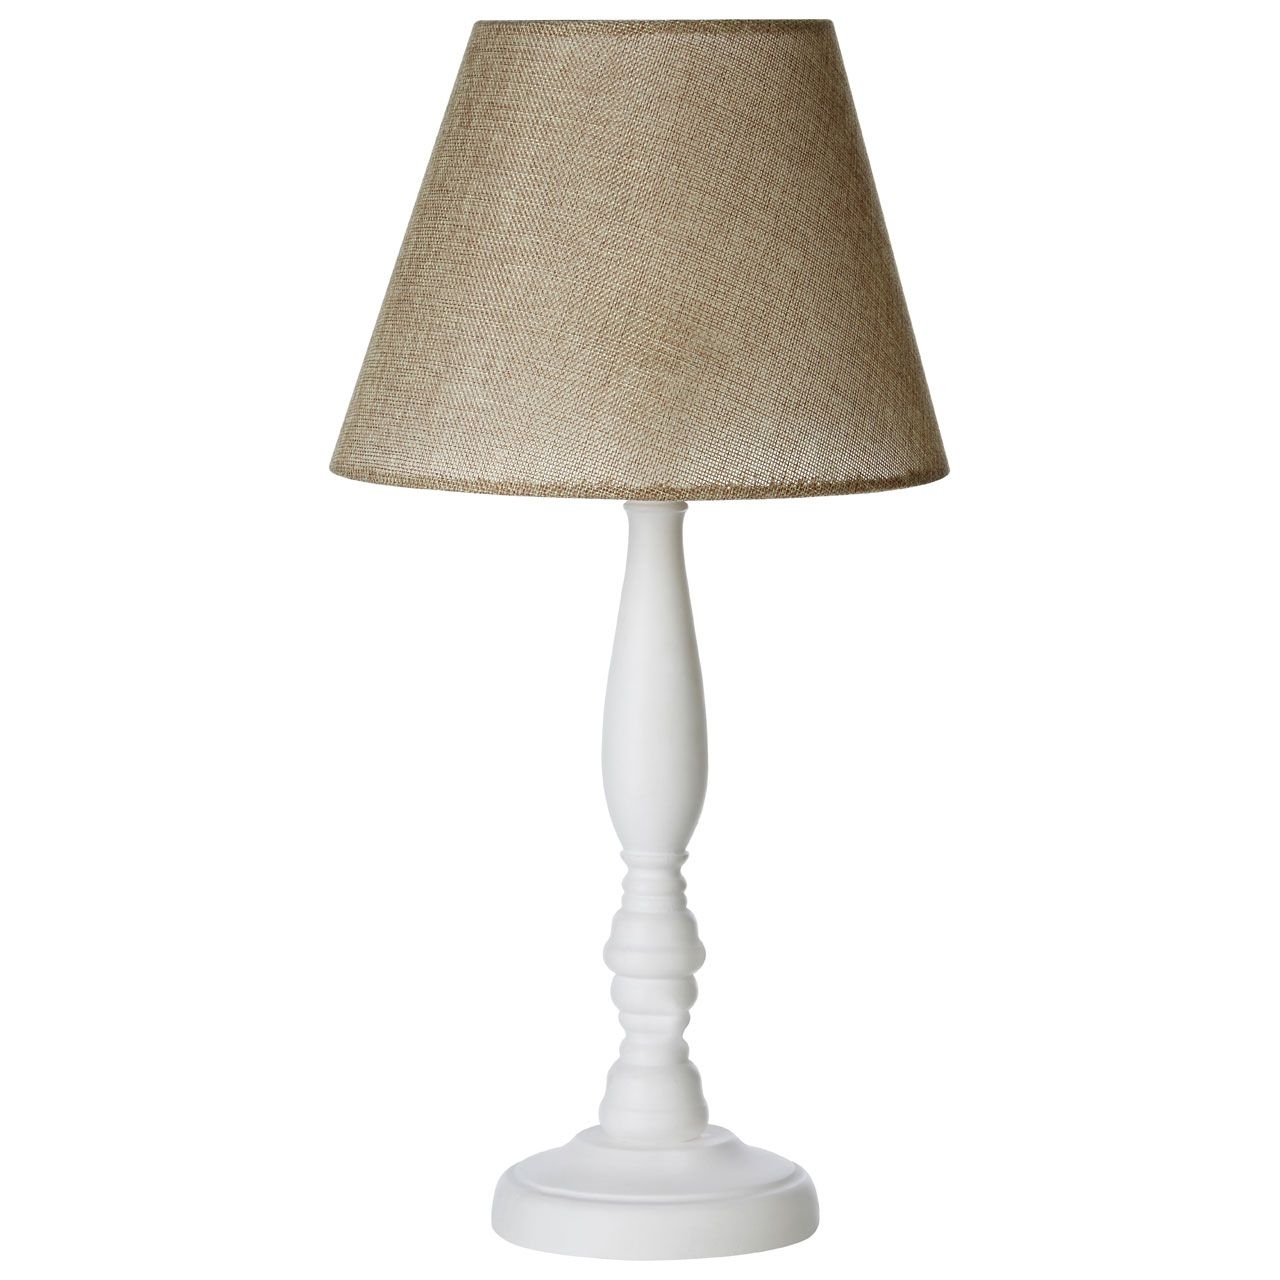 Maine Beige Fabric Shade Table Lamp With White Wooden Base